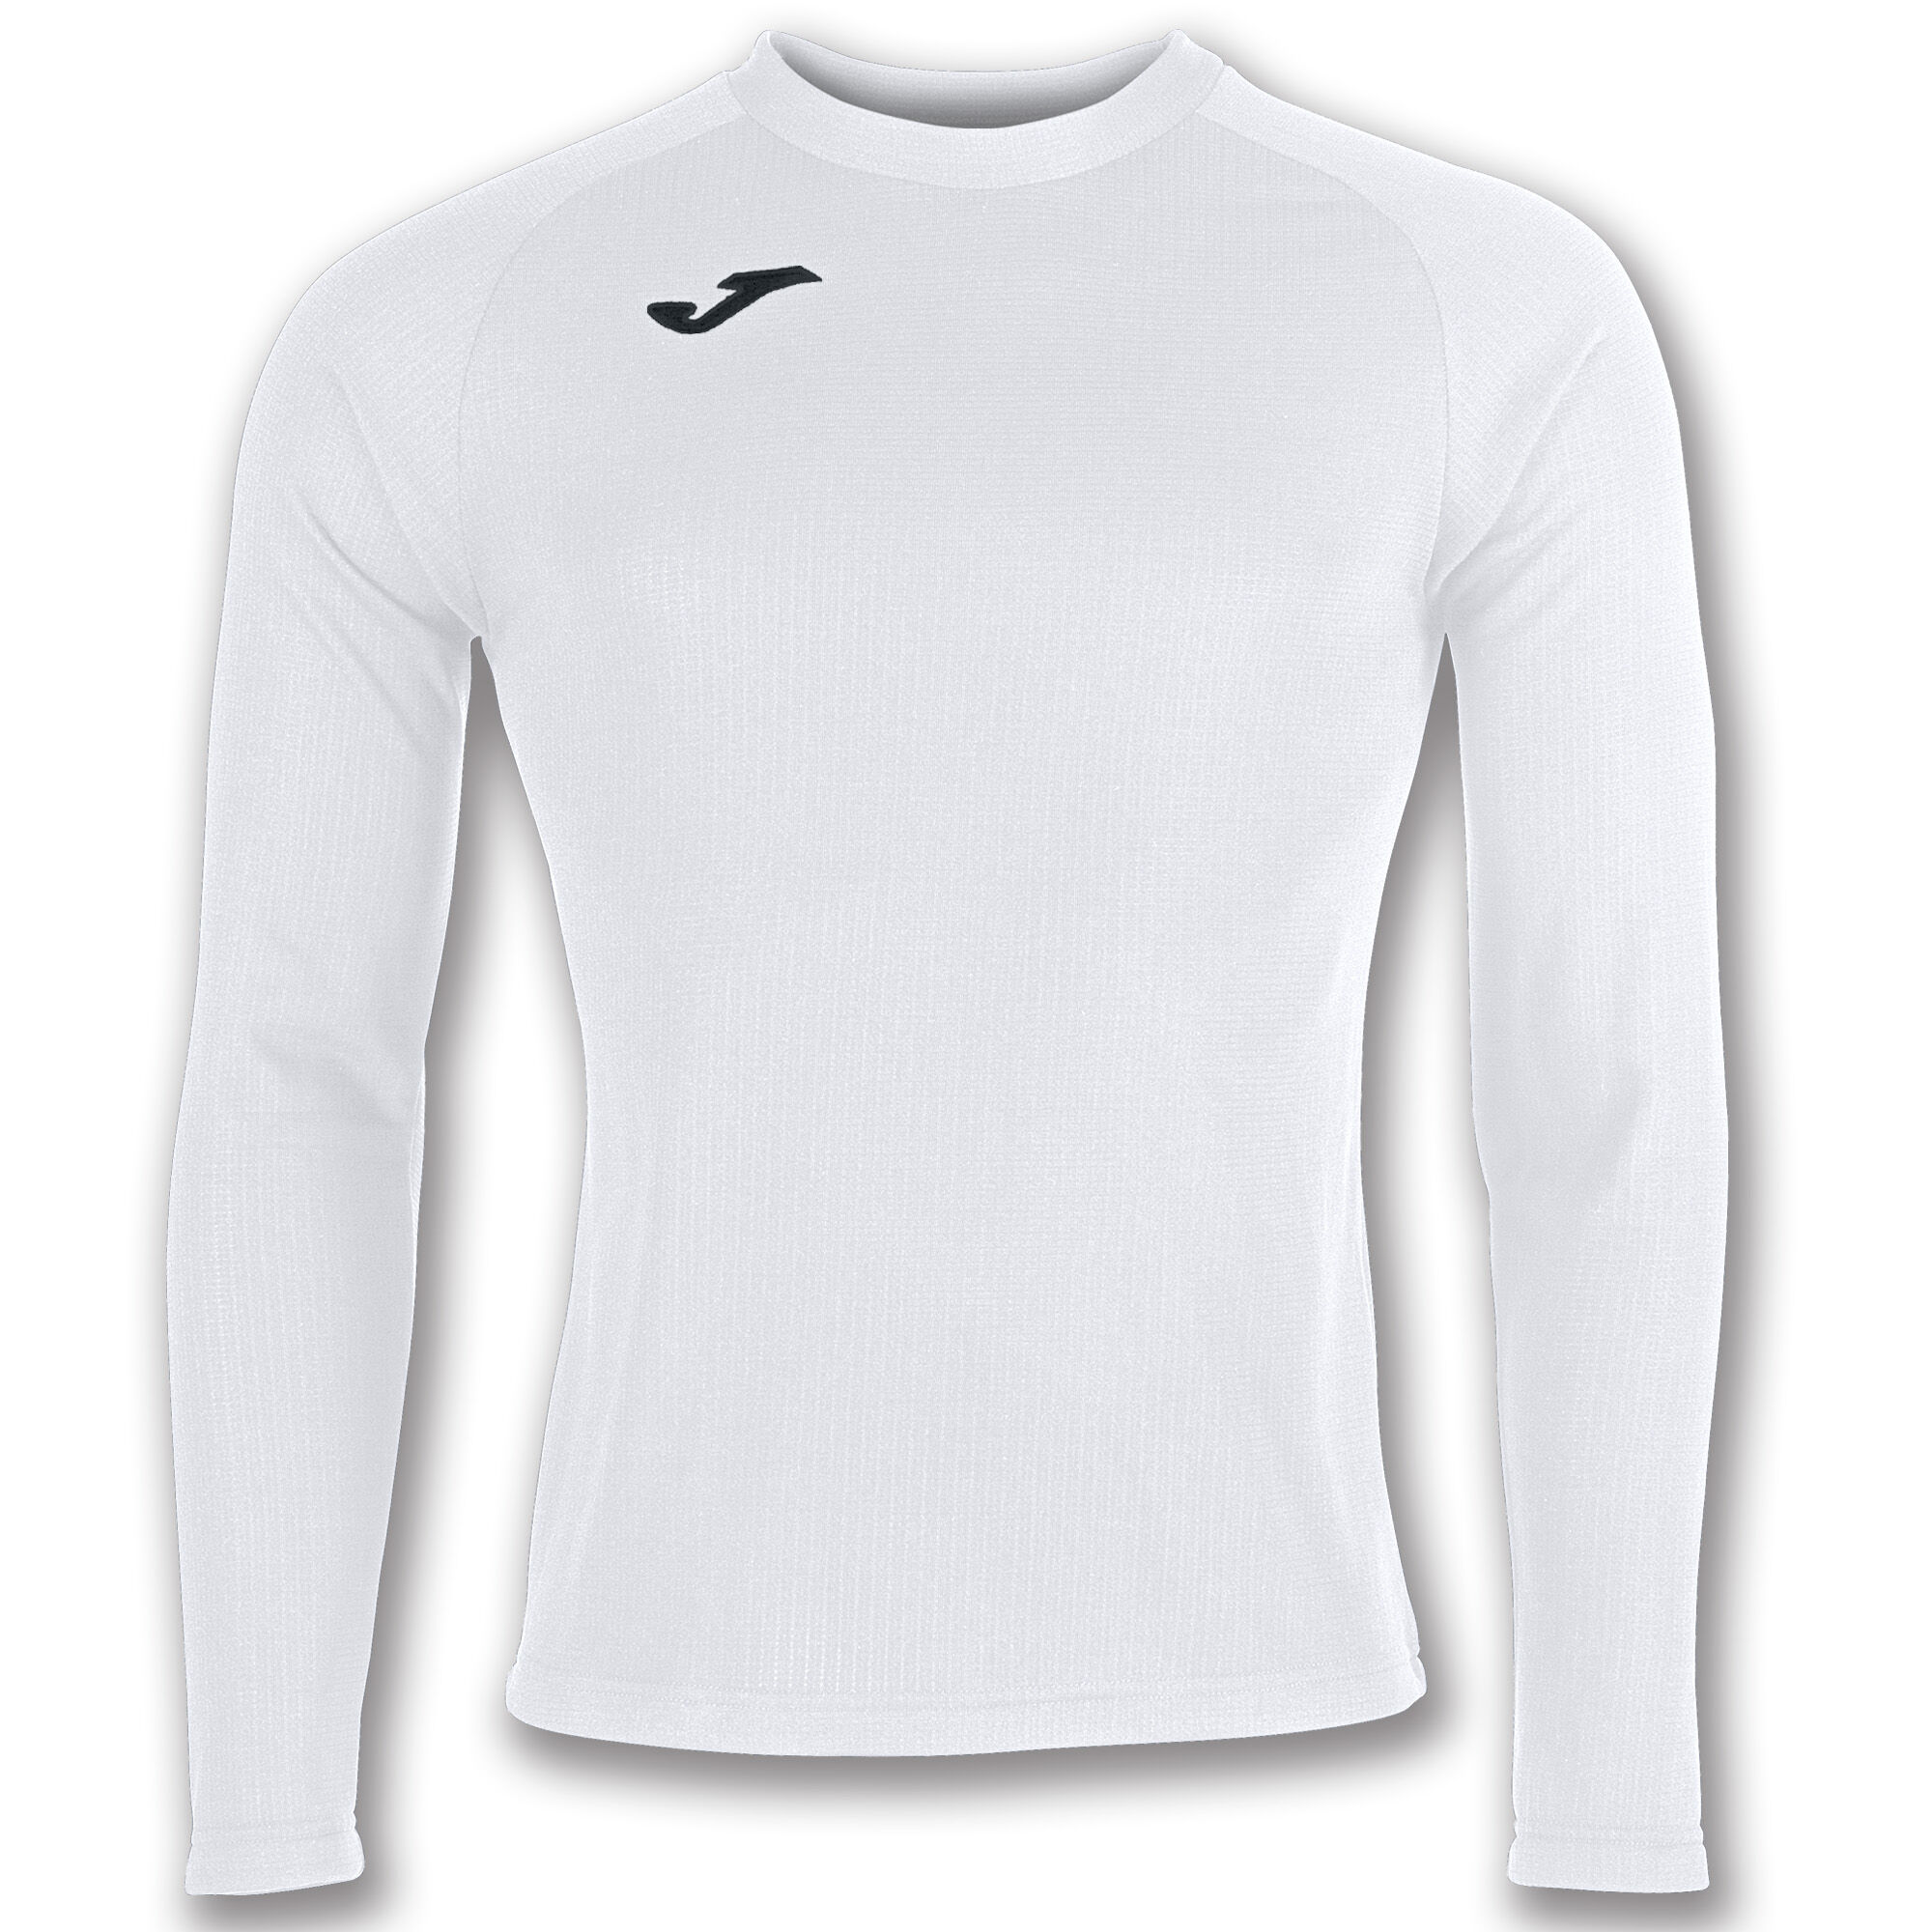 MAILLOT MANCHES LONGUES HOMME BRAMA BLANC